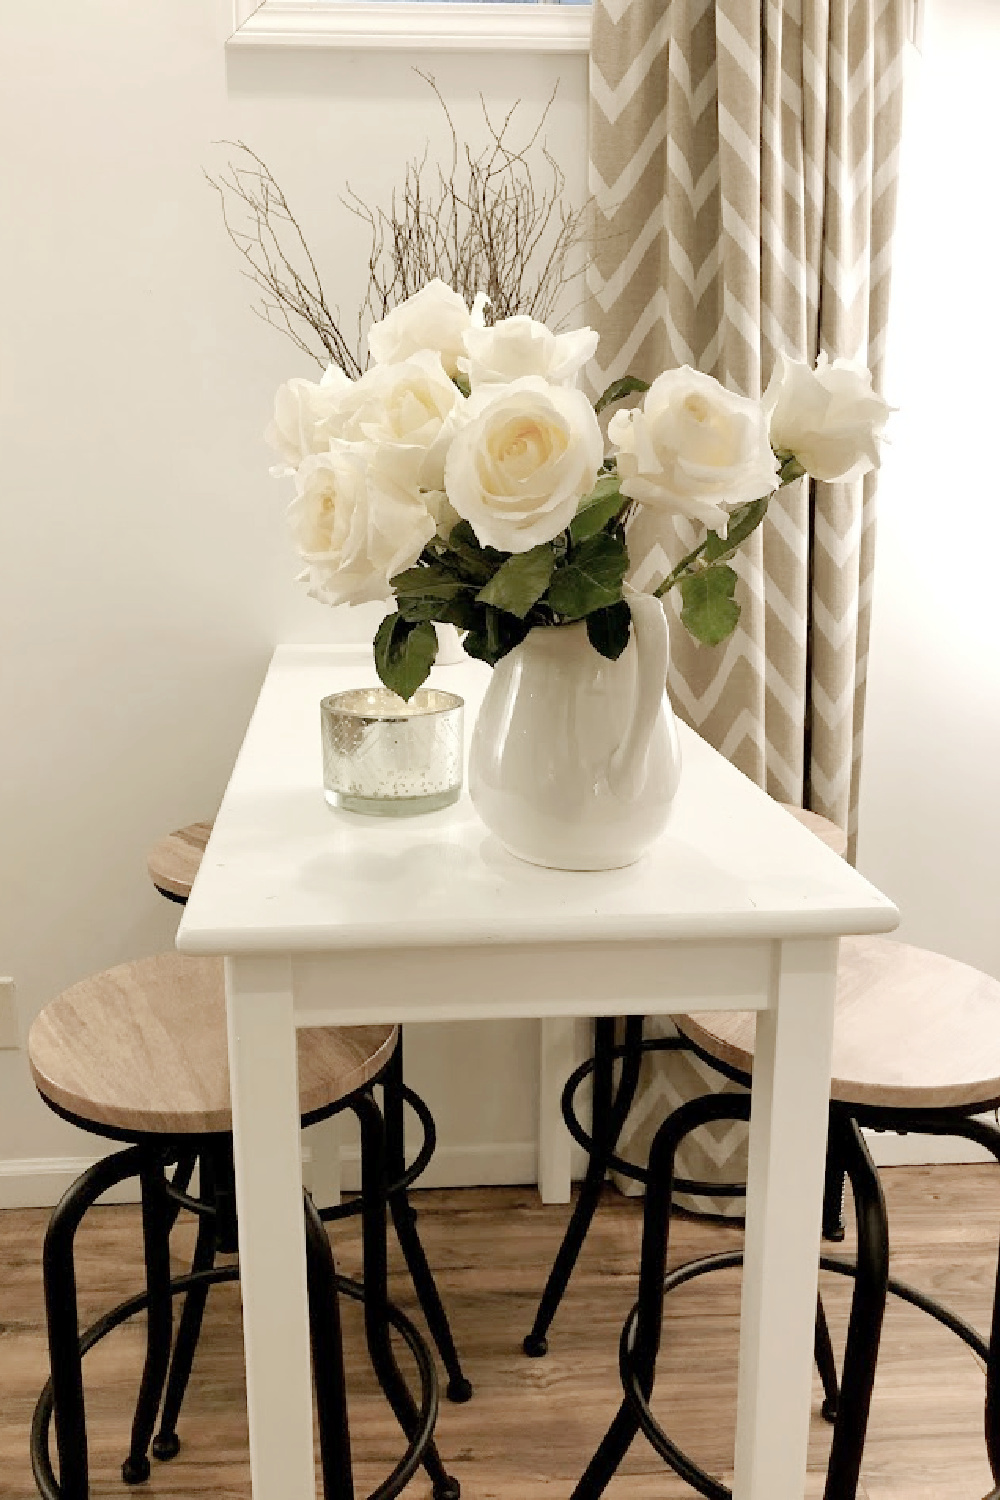 White roses in ironstone pitcher on pub table with industrial stools - Hello Lovely.